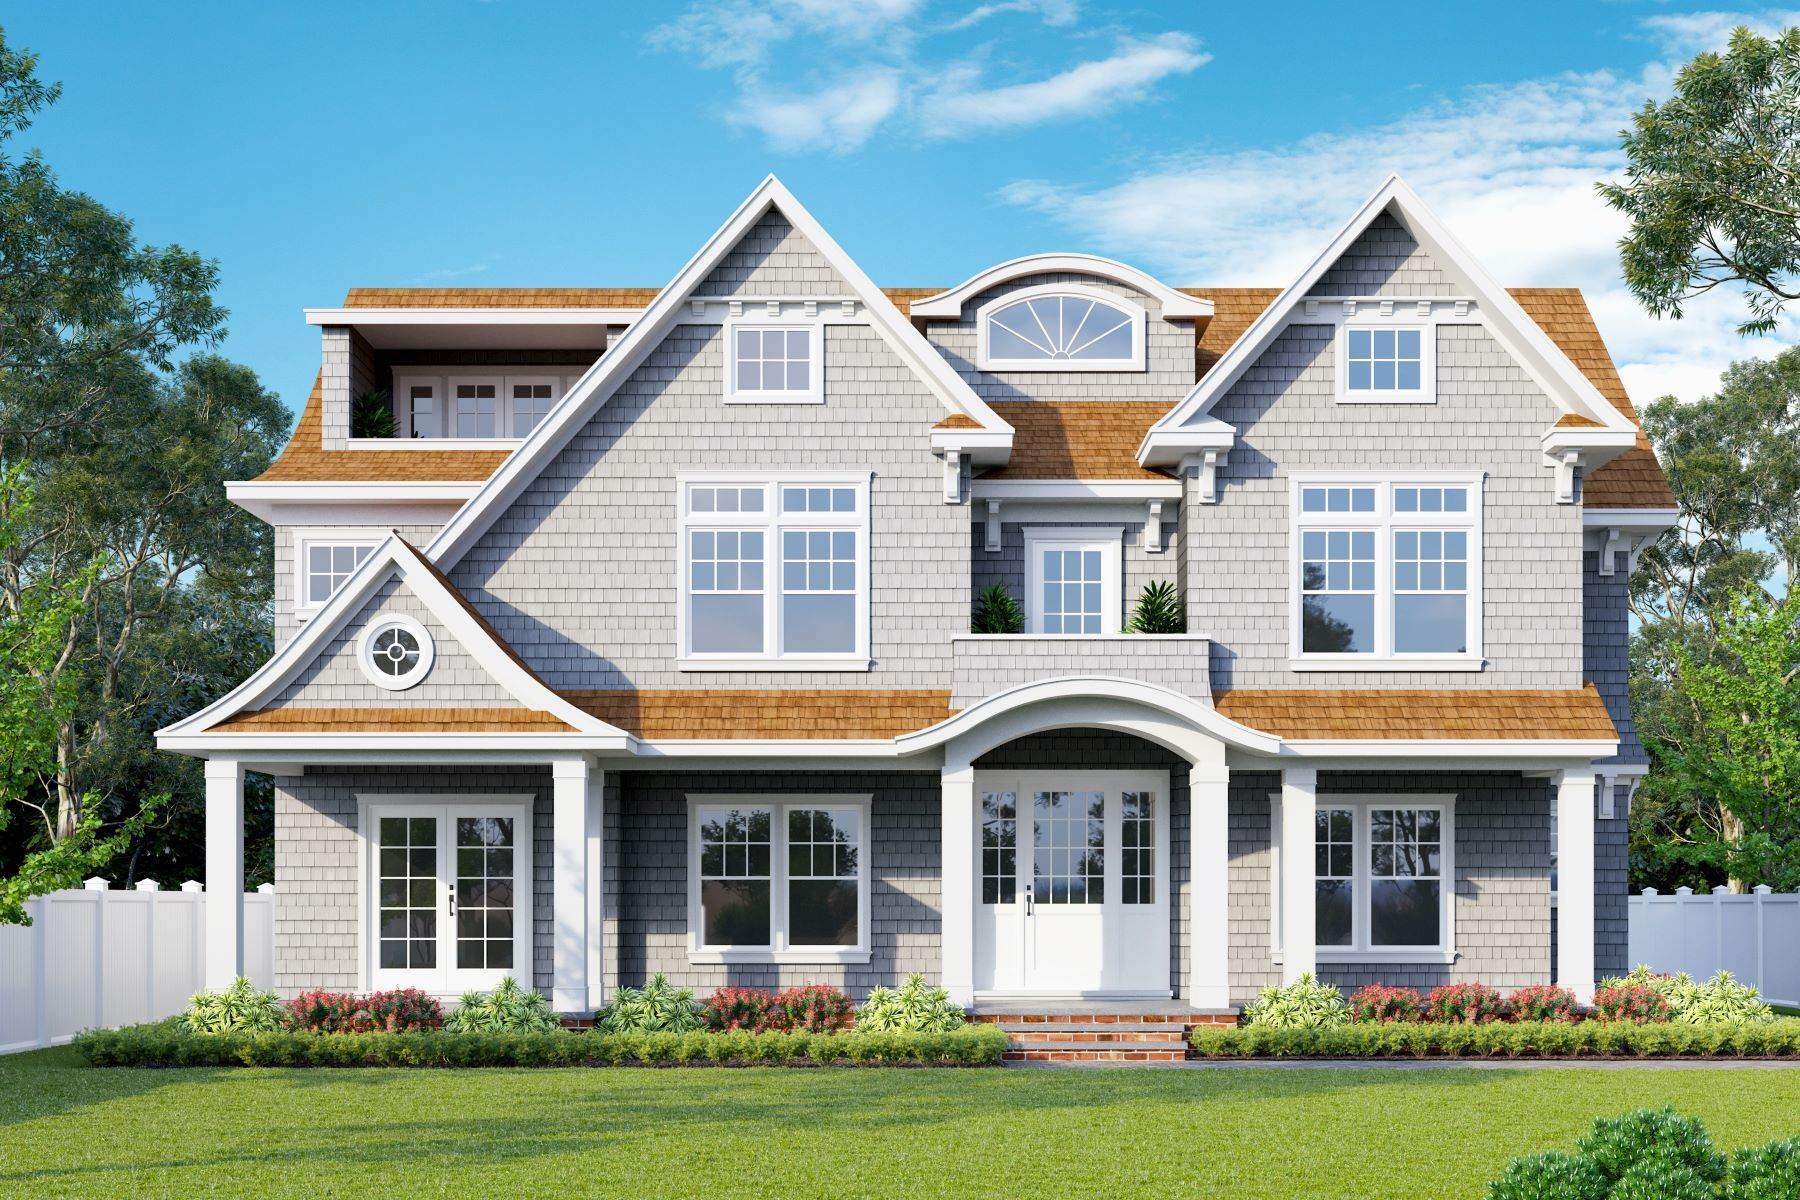 Single Family Homes for Sale at Impressive New Construction 218 Brooklyn Boulevard Sea Girt, New Jersey 08750 United States